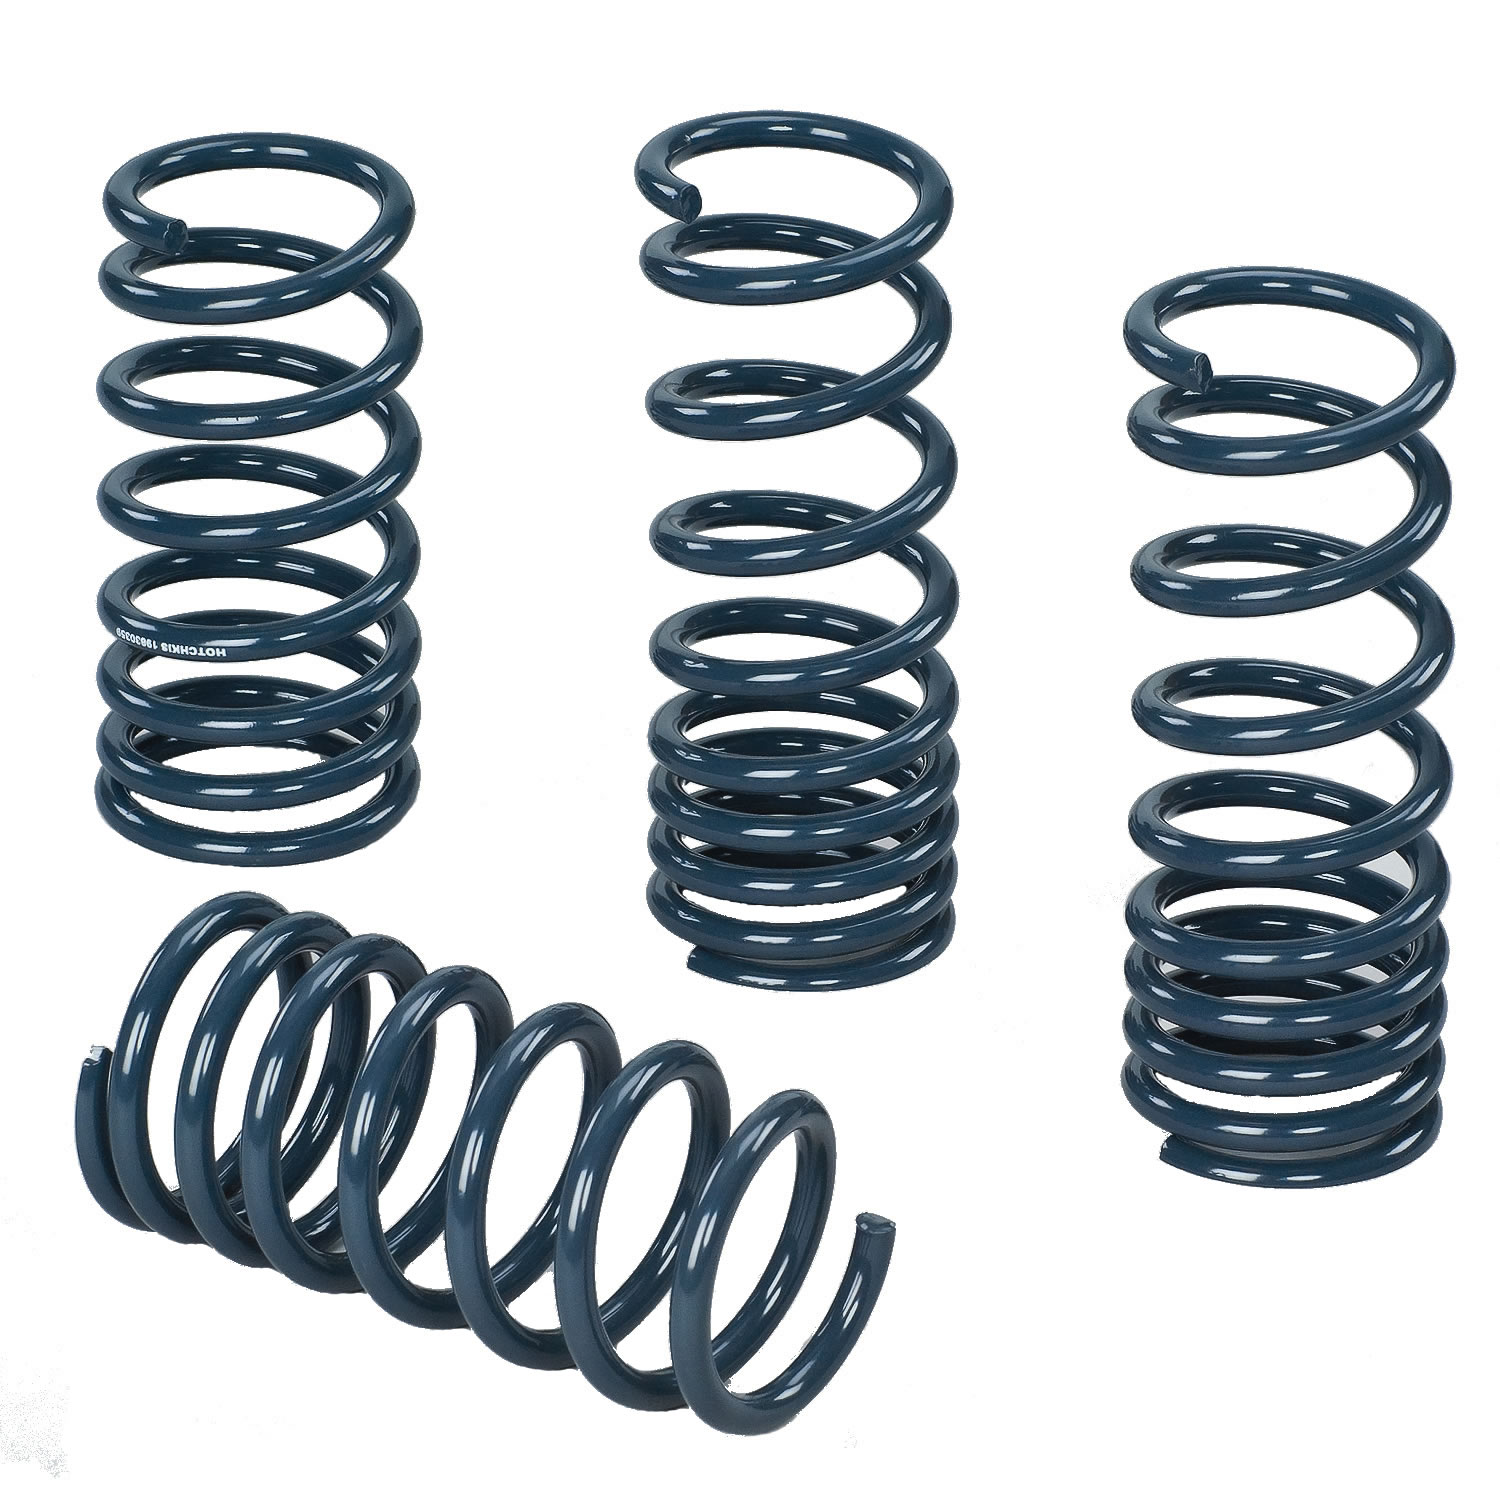 2006-2008 Lexus IS 250/350 Sport Coil Springs from Hotchkis Sport Suspension